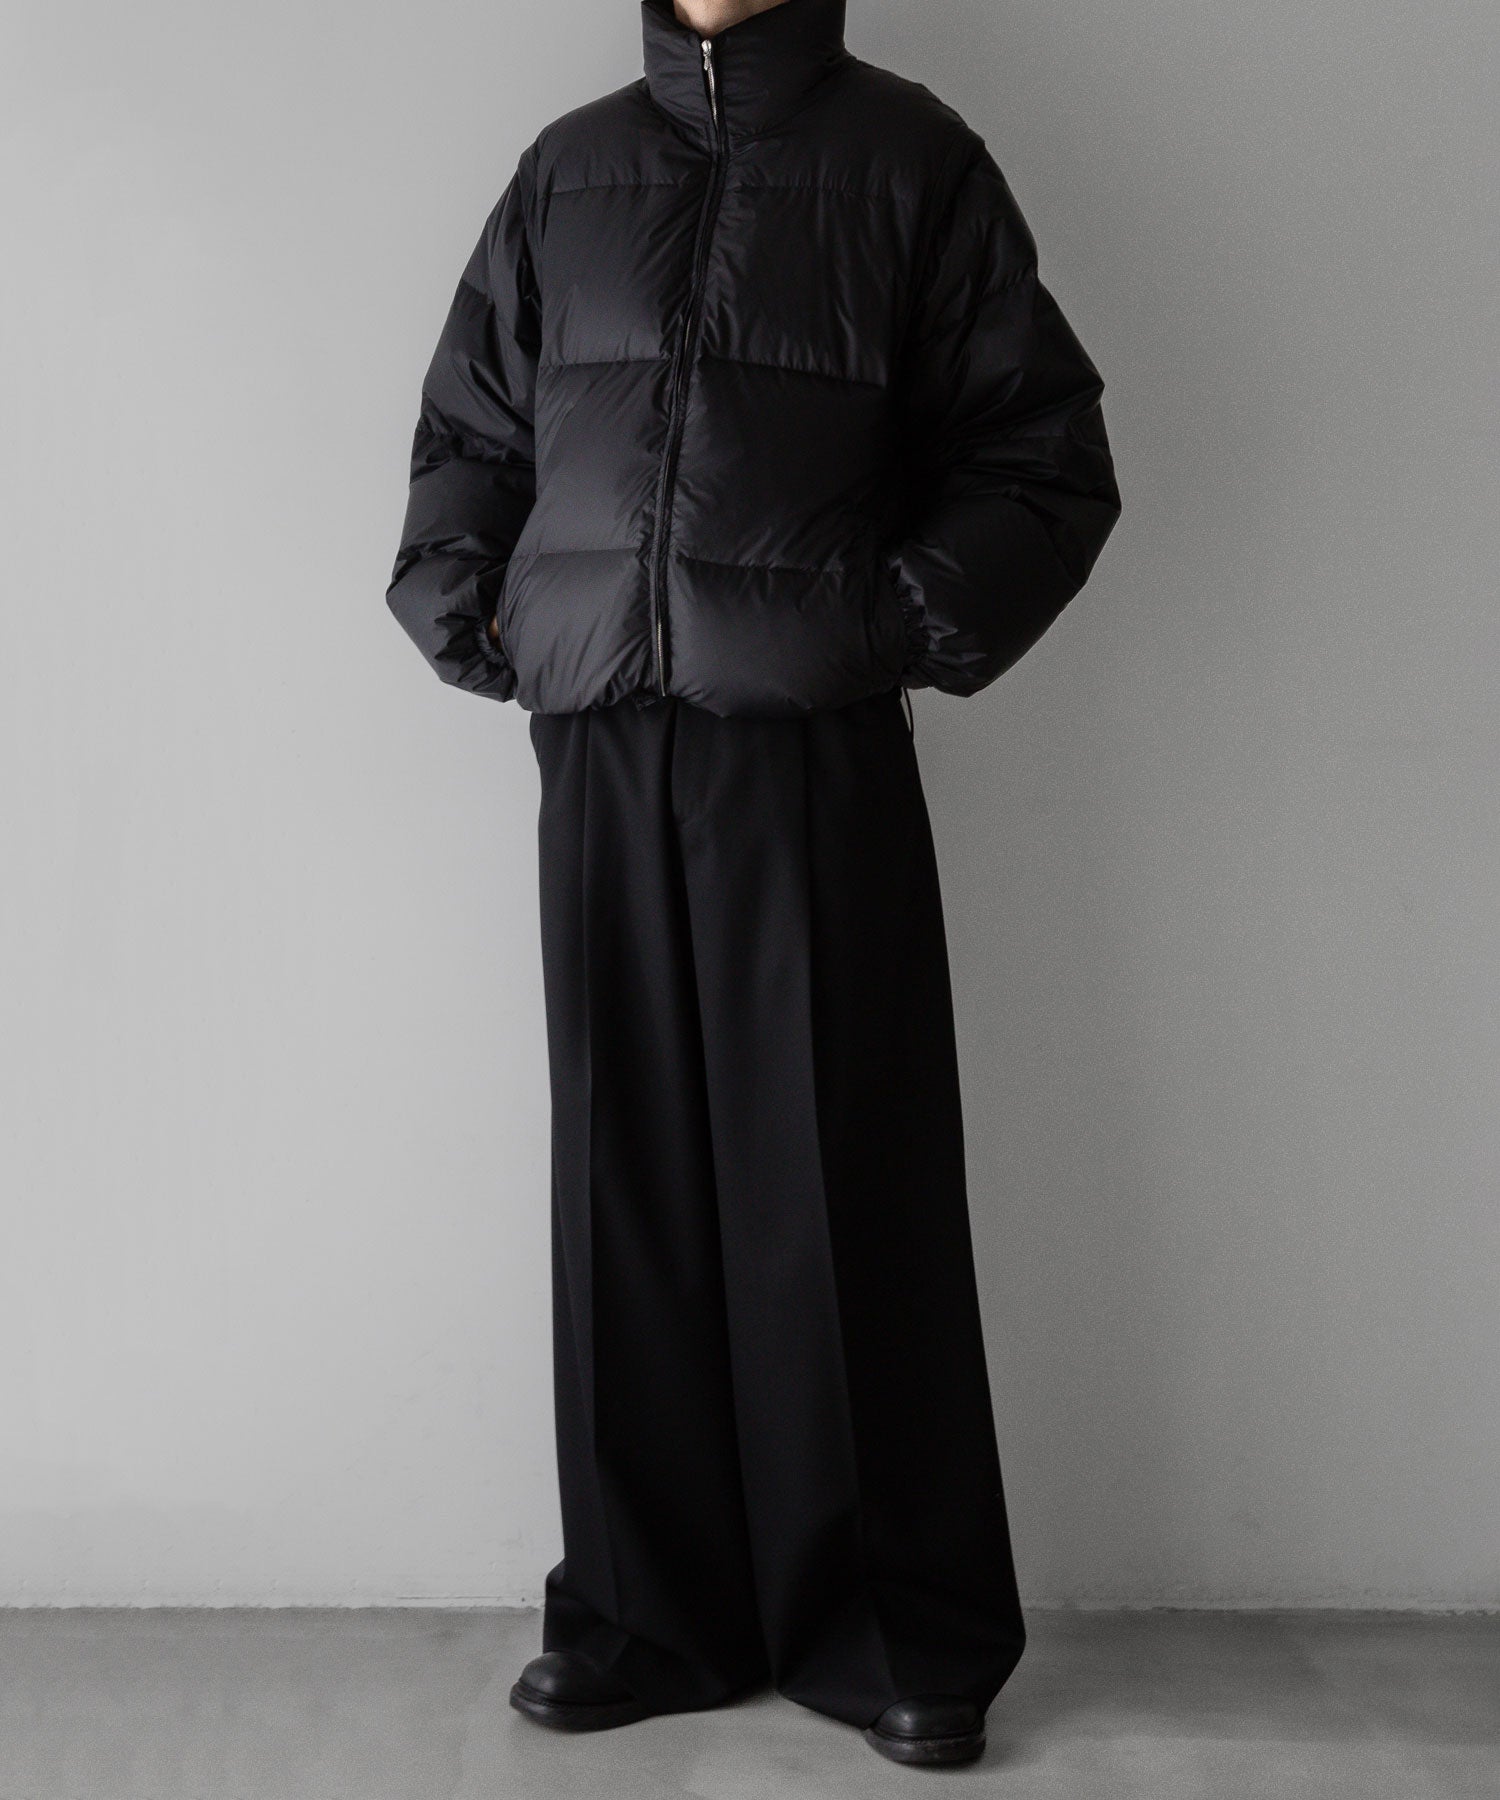 【stein】DETACHABLE SLEEVES CROPPED DOWN JACKET - BLACK